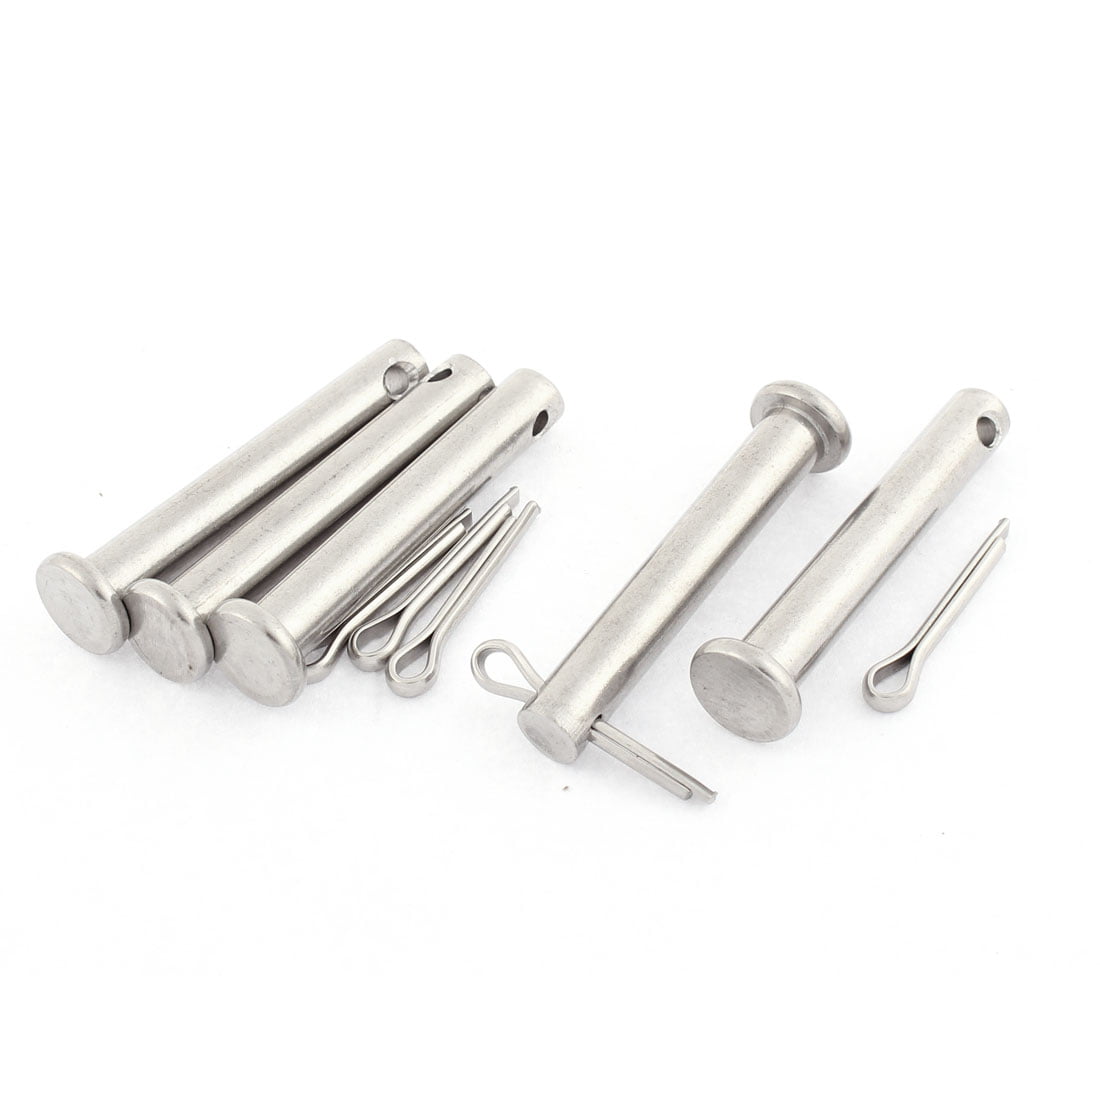 5Pcs Split Cotter Pin 3.5mm x 20mm 304 Stainless Steel 2-Prongs Silver Tone for Home DIY Application